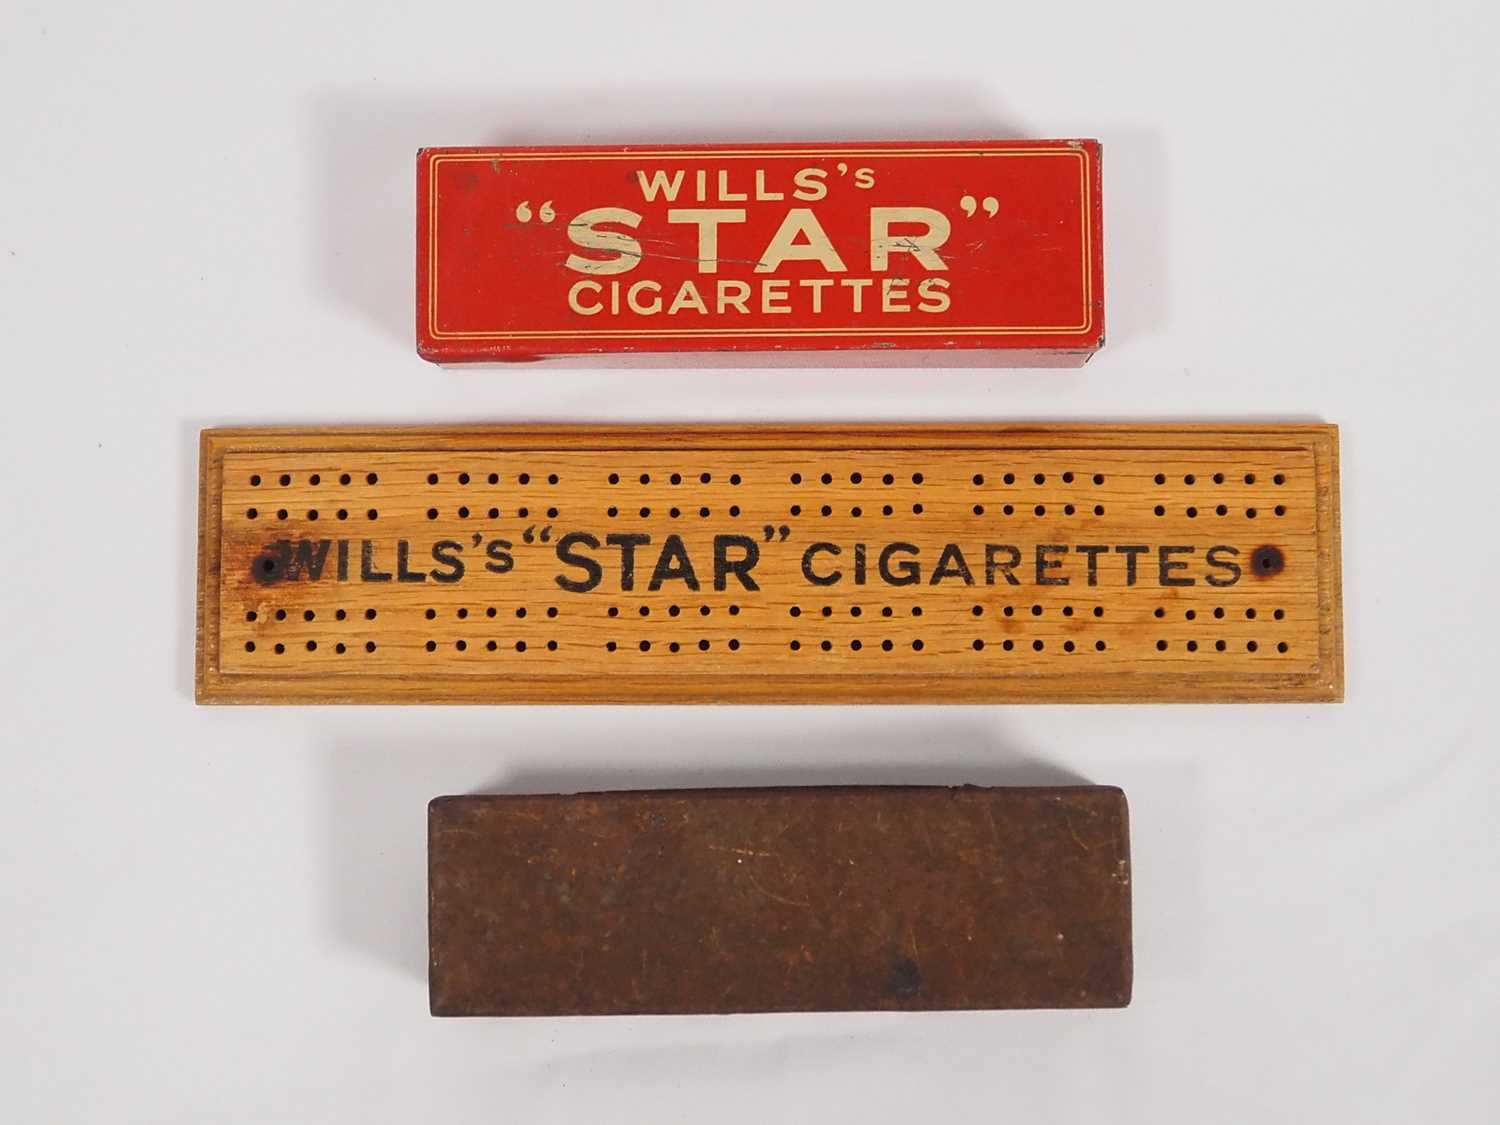 Two sets of Dominoes and scoring board. Will's Woodbine and Will's 'Star' Cigarettes (possibly